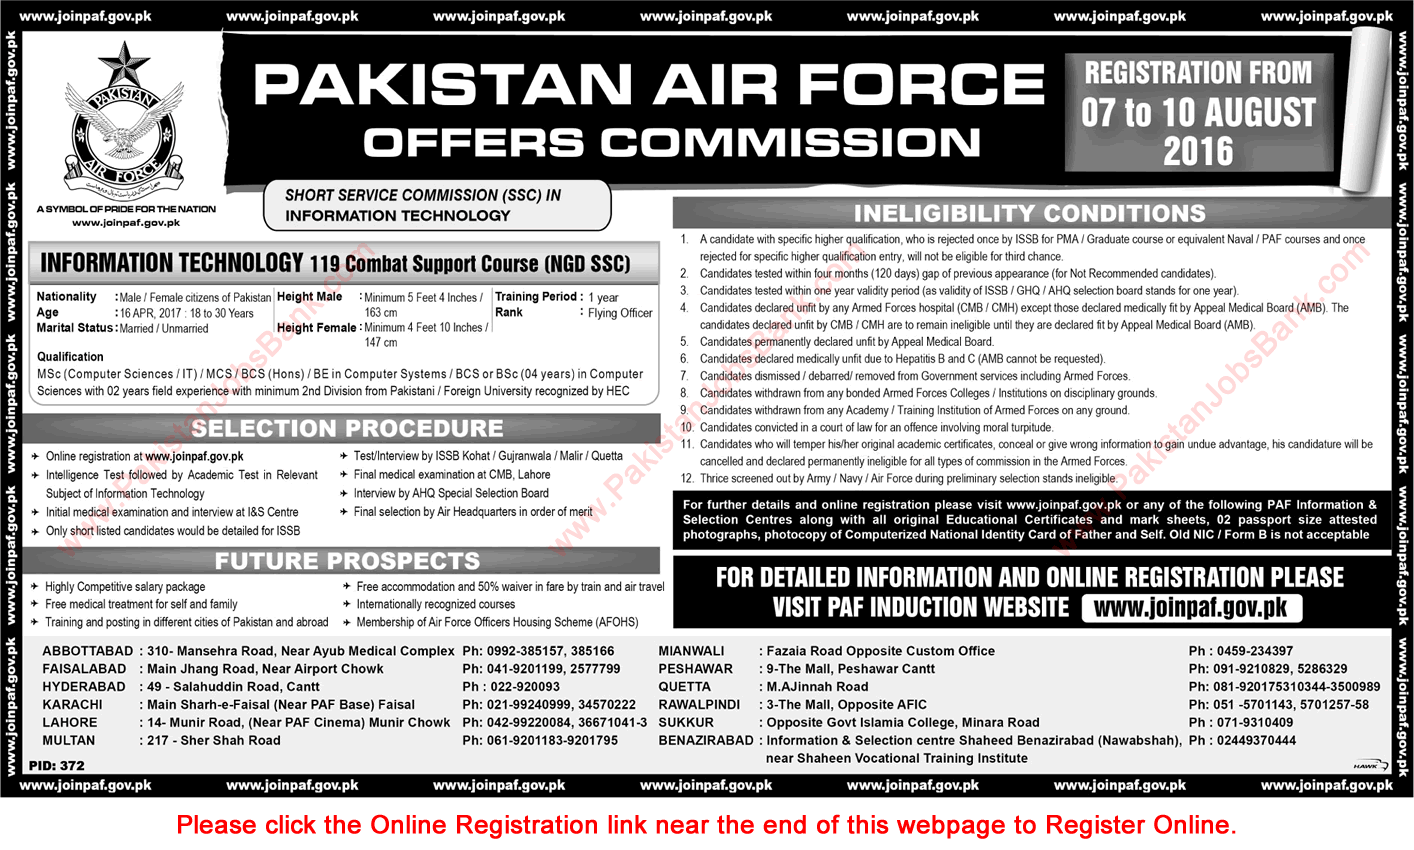 Join Pakistan Air Force August 2016 Online Registration PAF SSC Commission in 119 Combat Support Course Latest